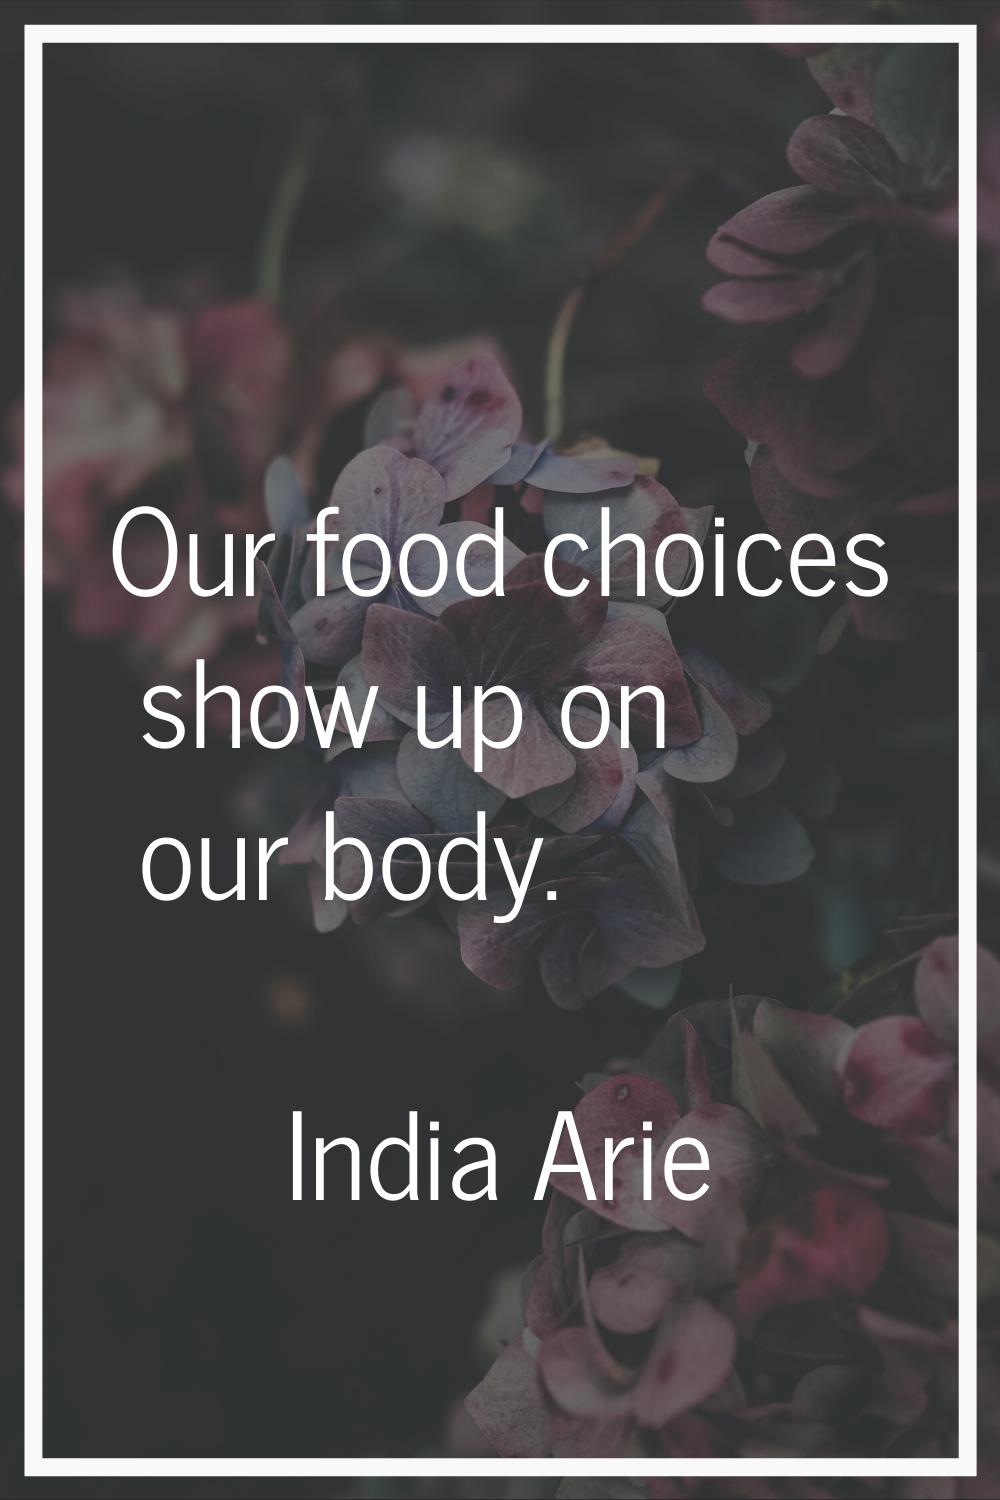 Our food choices show up on our body.